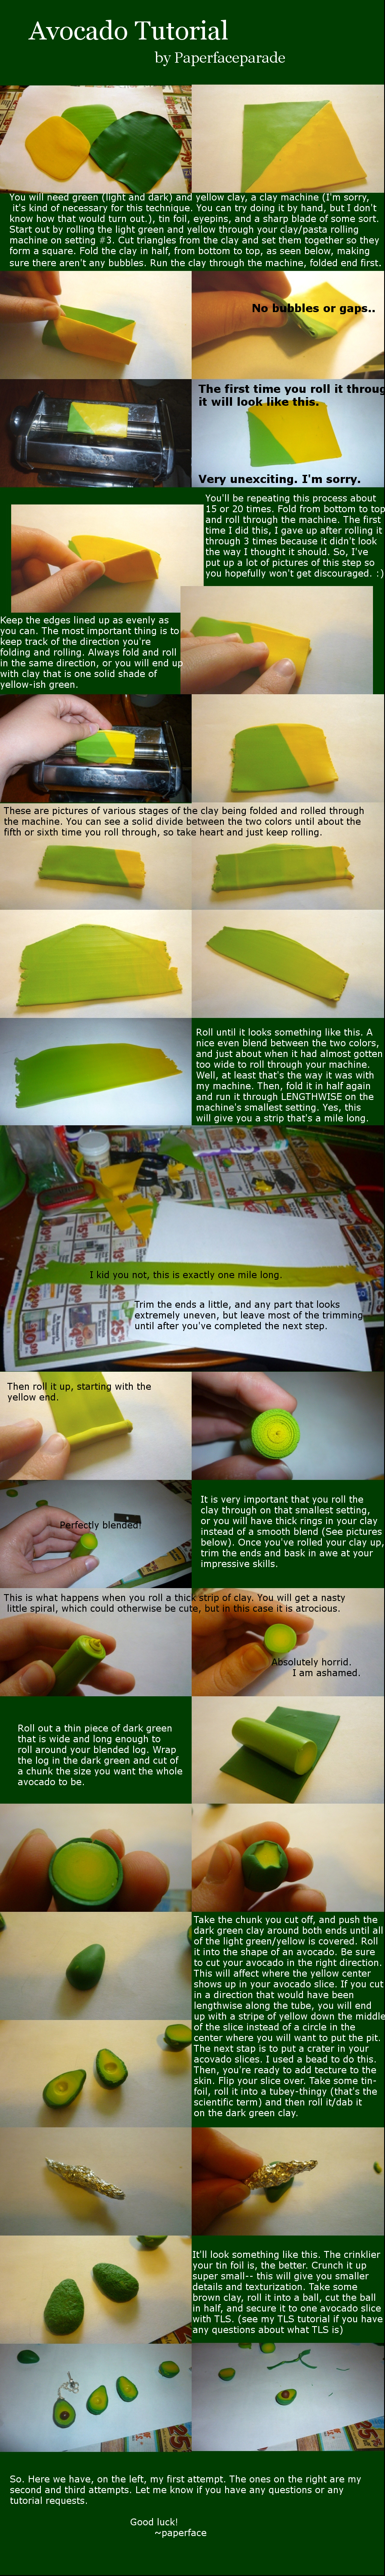 avocado_cane_skinner_blend_polymer_clay_tutorial_by_paperfaceparade-d5ht9ht.jpg